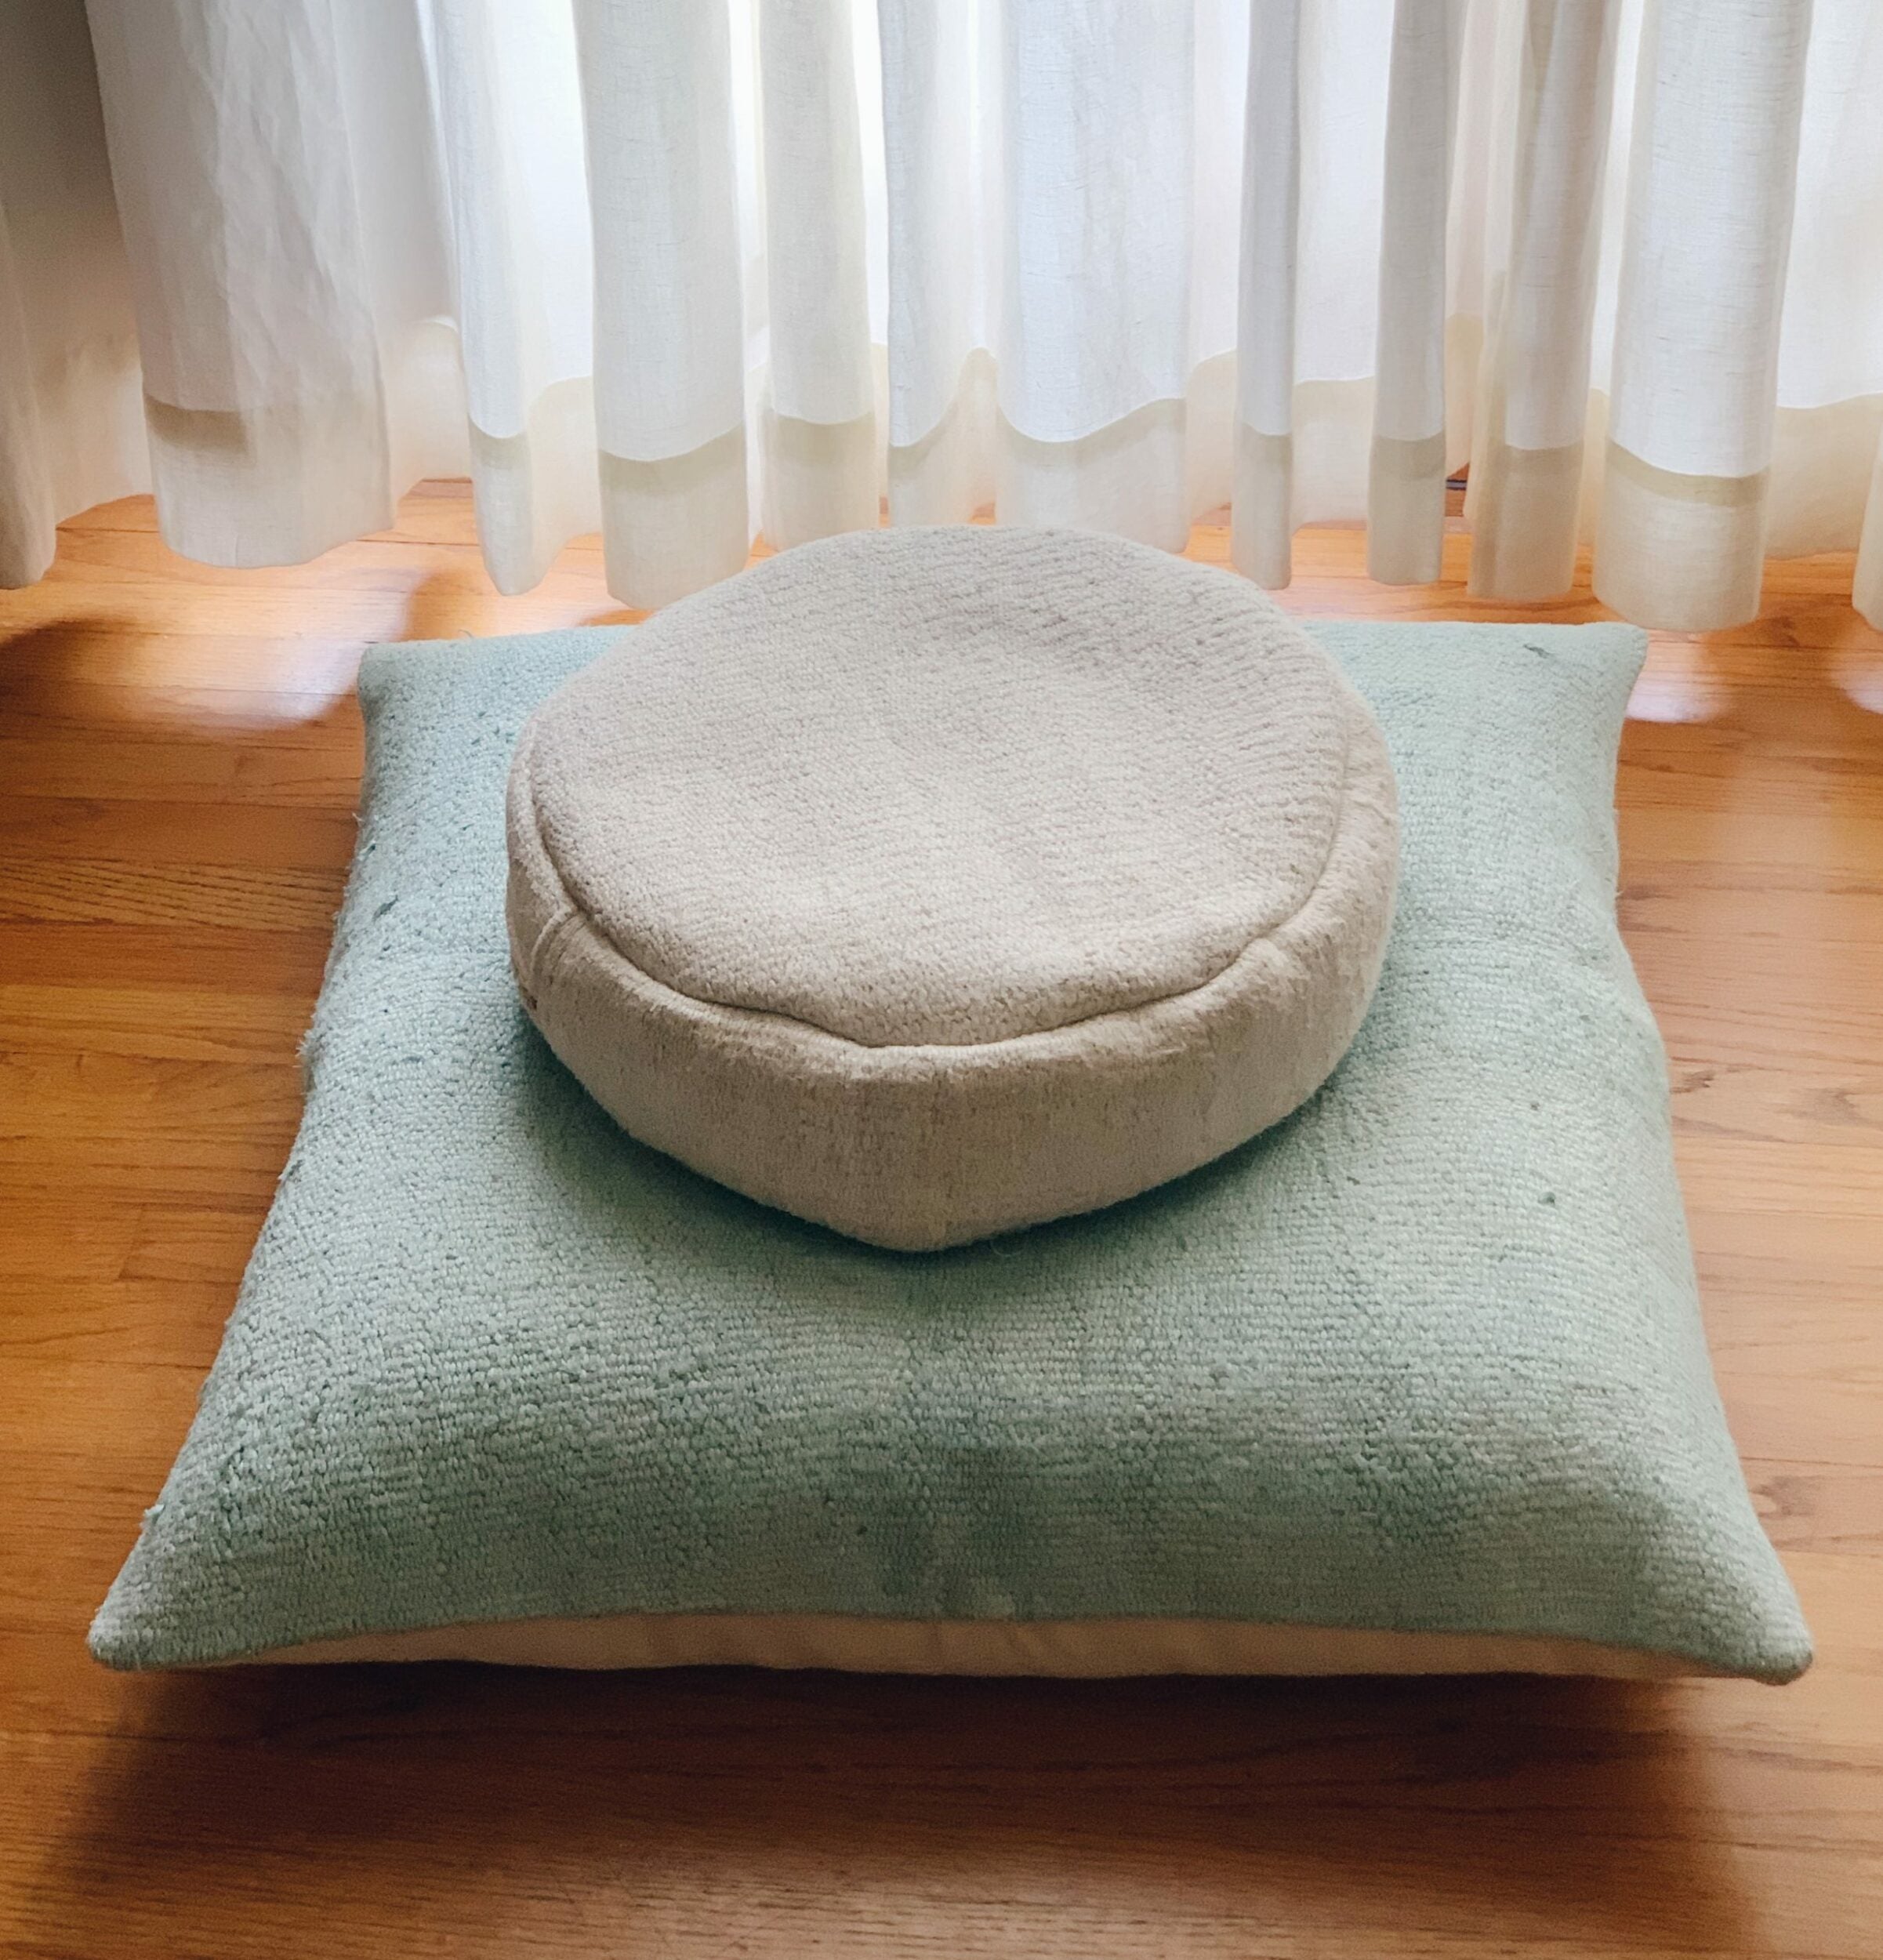 Zabuton: 20 Things to Know About Japanese Floor Cushions